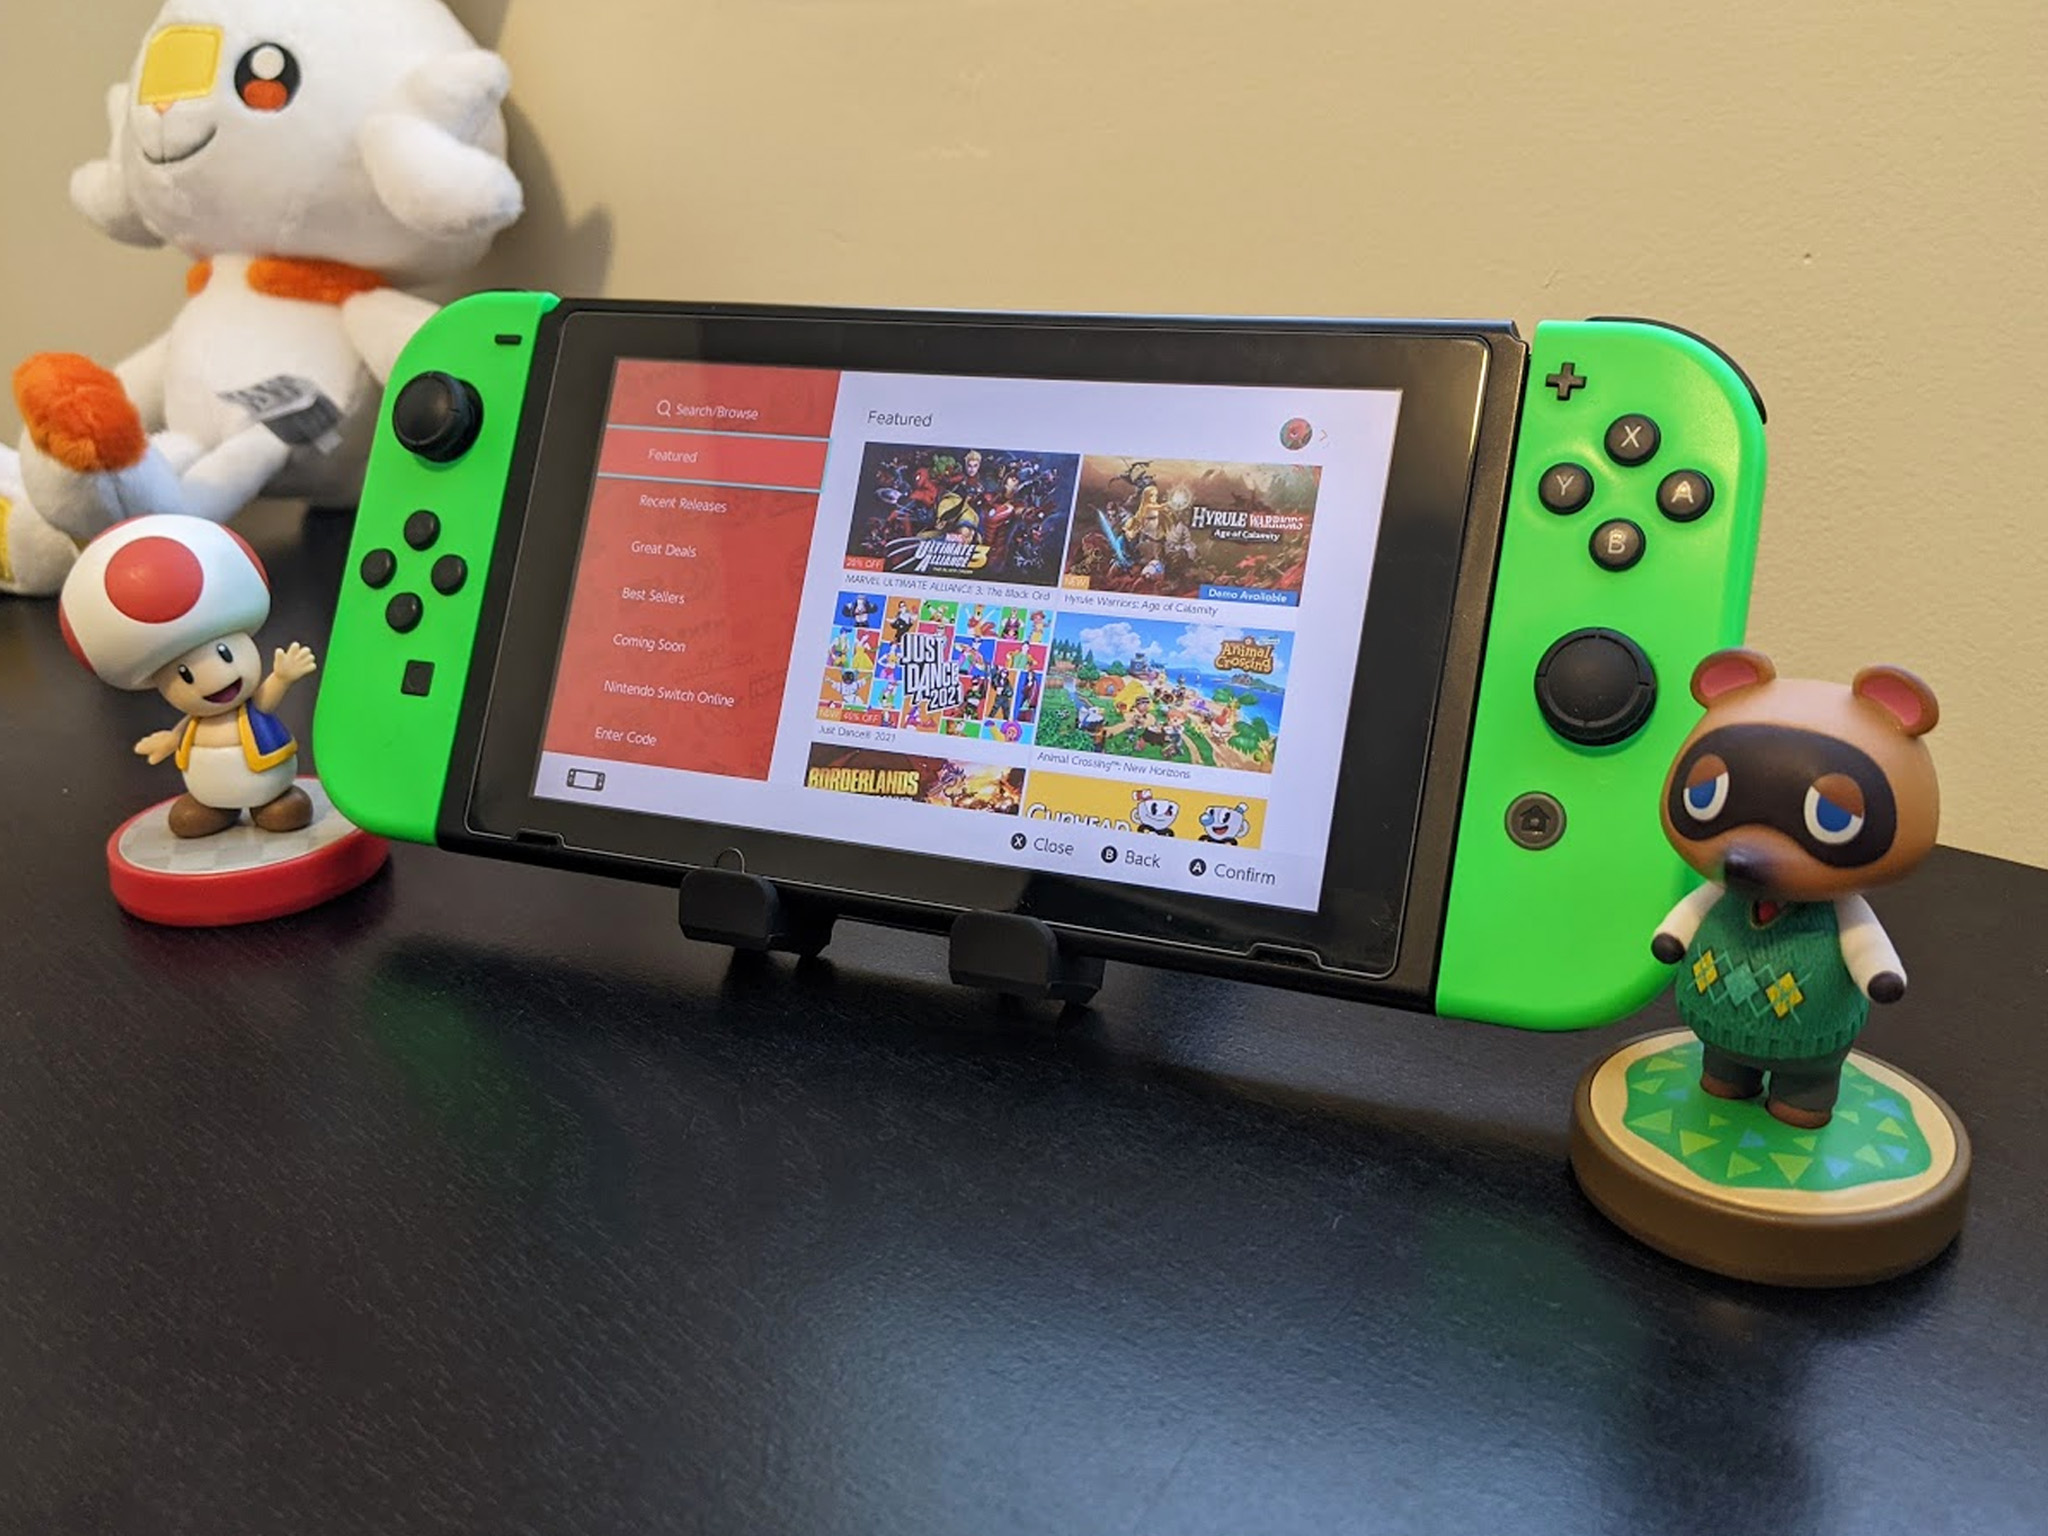 How to Buy Digital Switch Games in Nintendo eShop in The